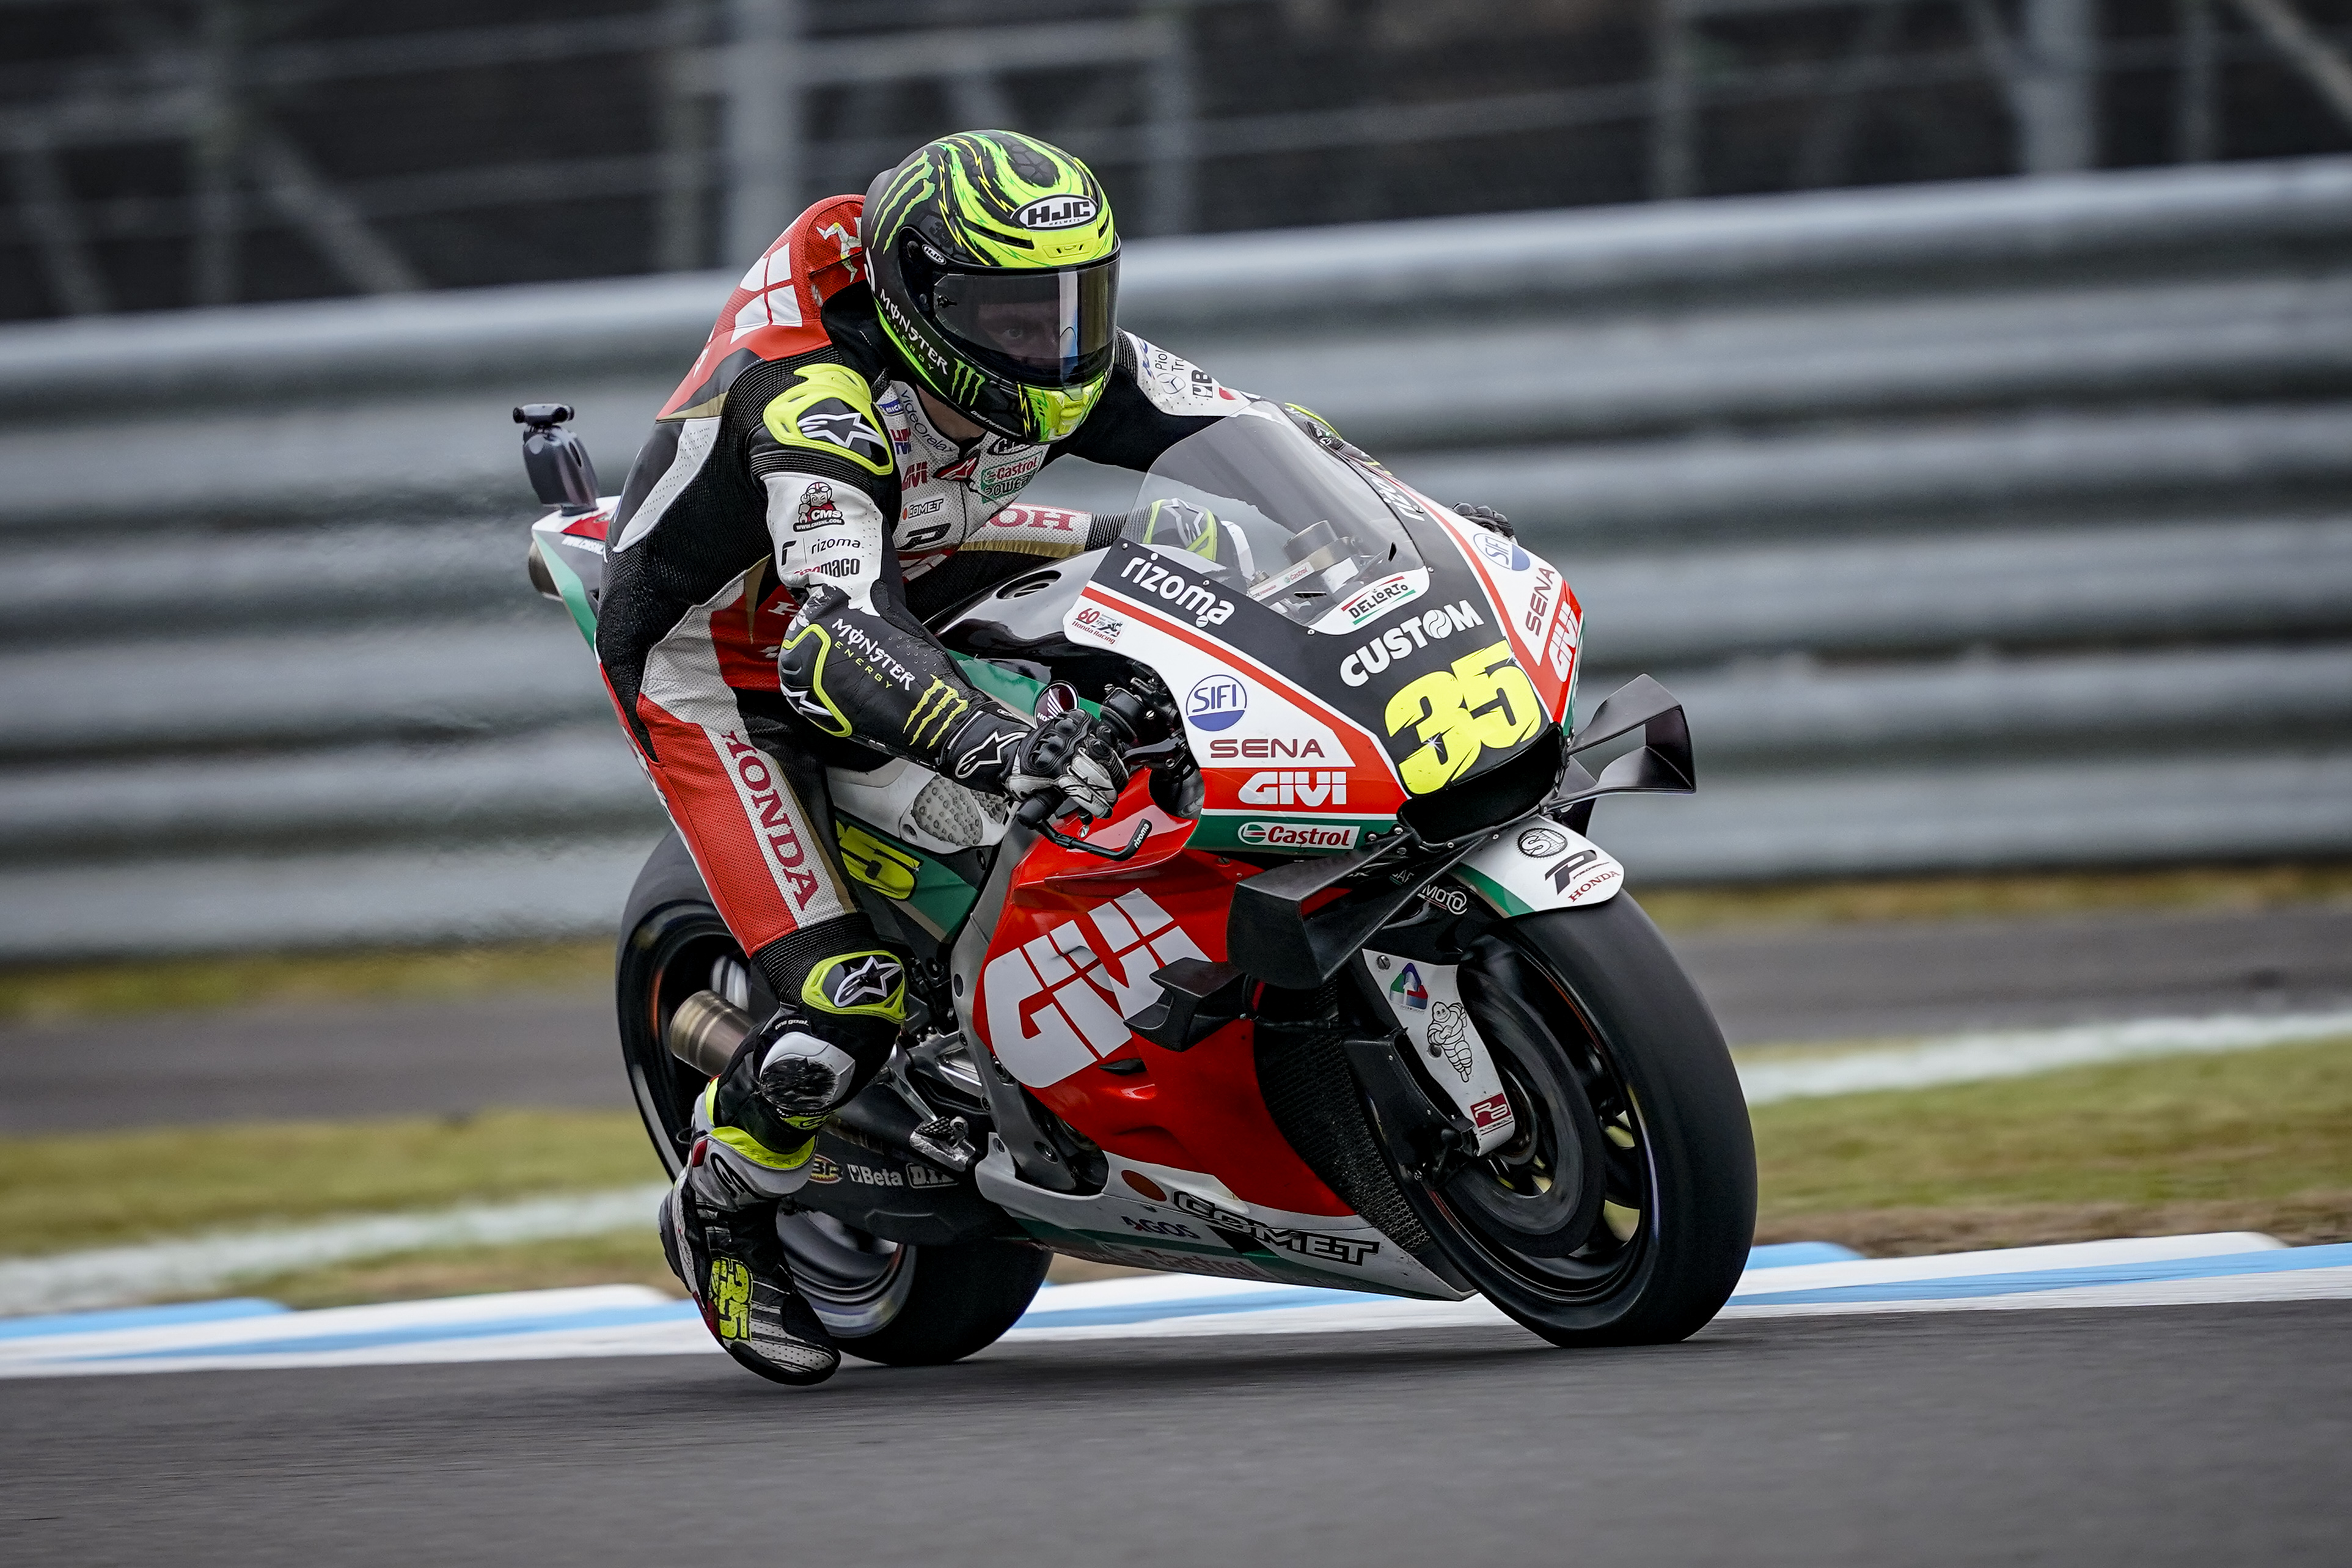 Fifth spot on the grid for Crutchlow in Japan